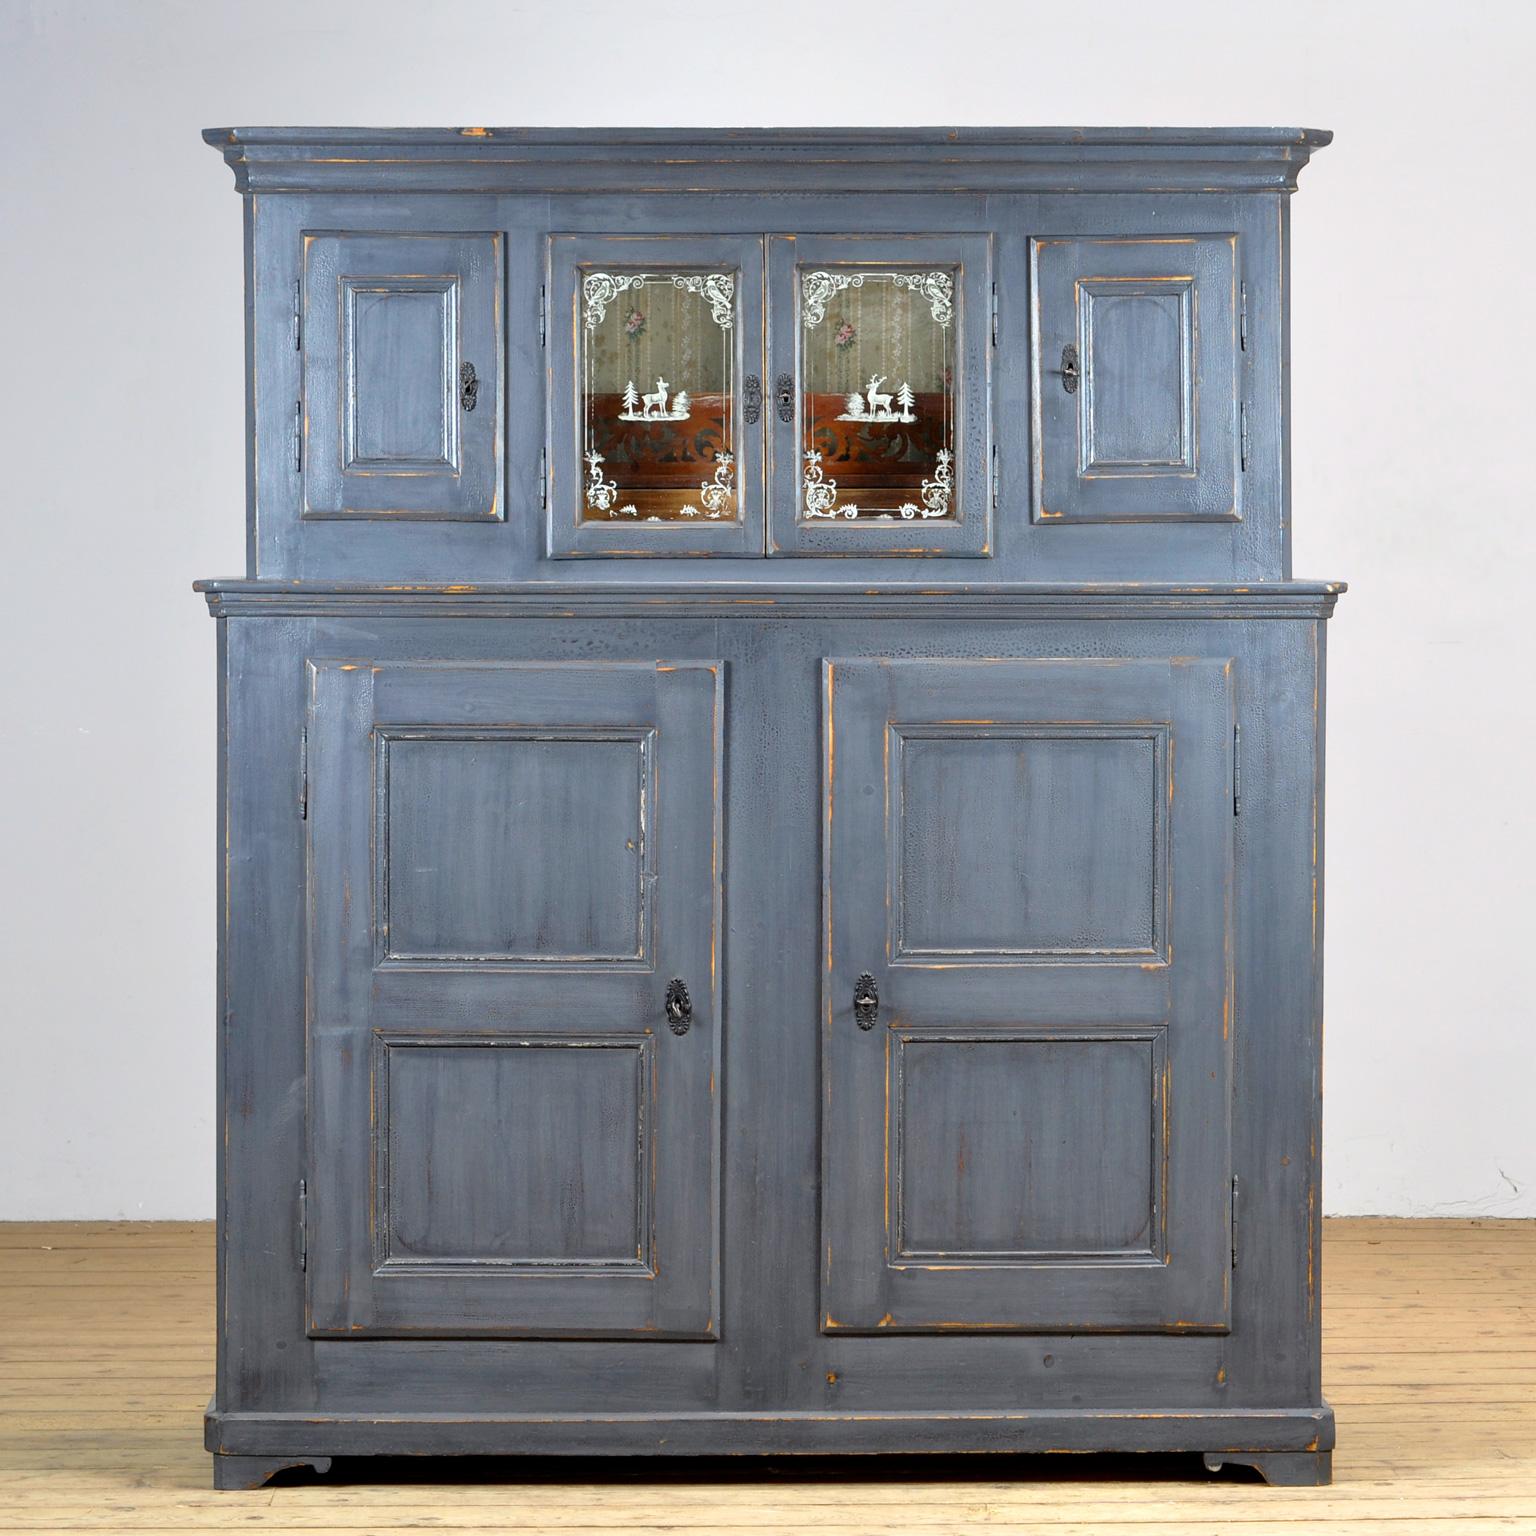 Solid pine cabinet from the 1920s. The cabinet consists of 2 separate parts. In the upper part 4 doors with a shelf and two drawers behind the two middle doors. The glass is hand painted. At the bottom 2 doors with a shelf for plenty of storage